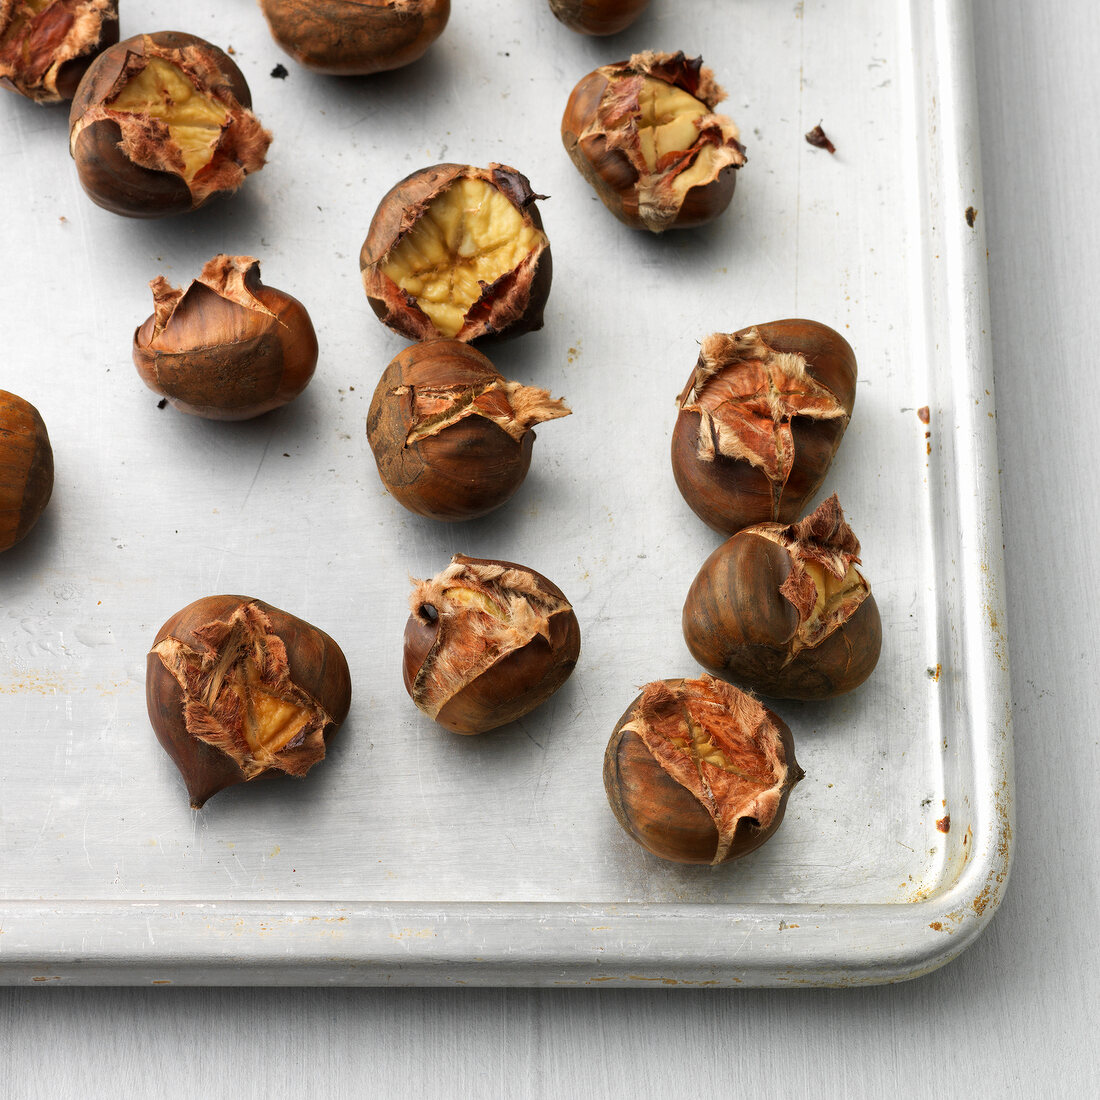 Roasted chestnuts with shells on baking tray